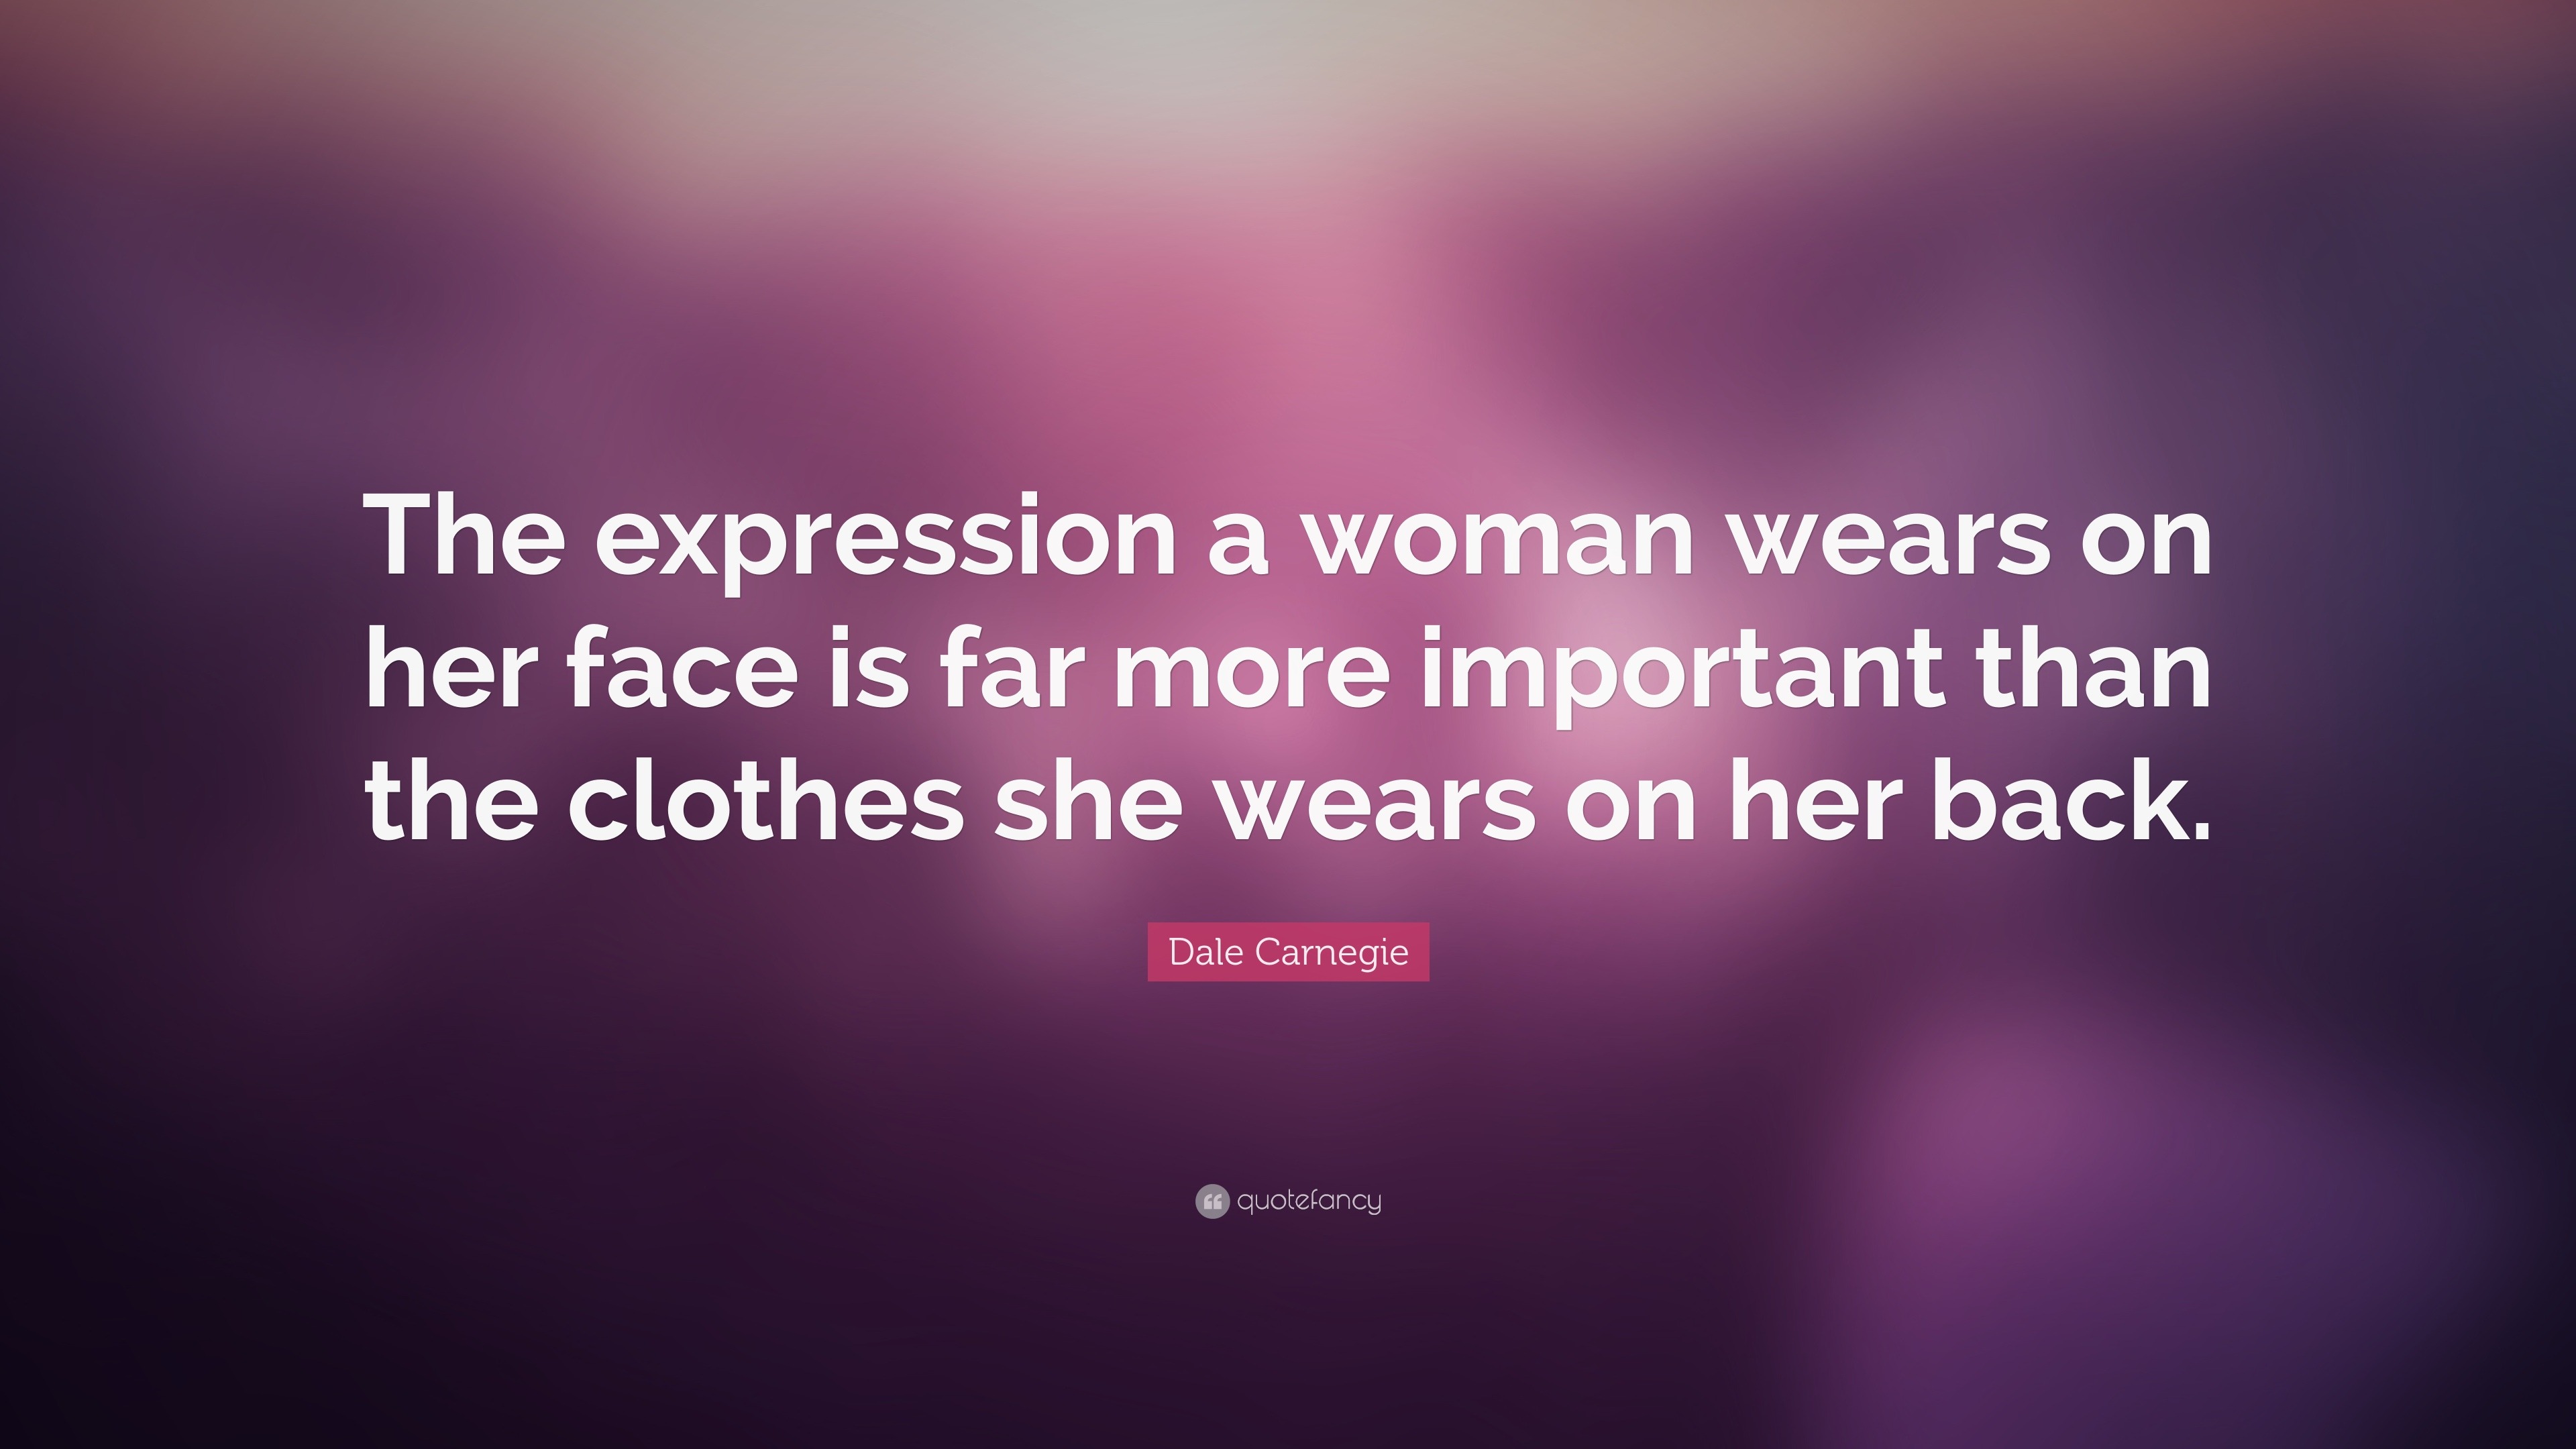 Dale Carnegie Quote: “The expression a woman wears on her face is far ...